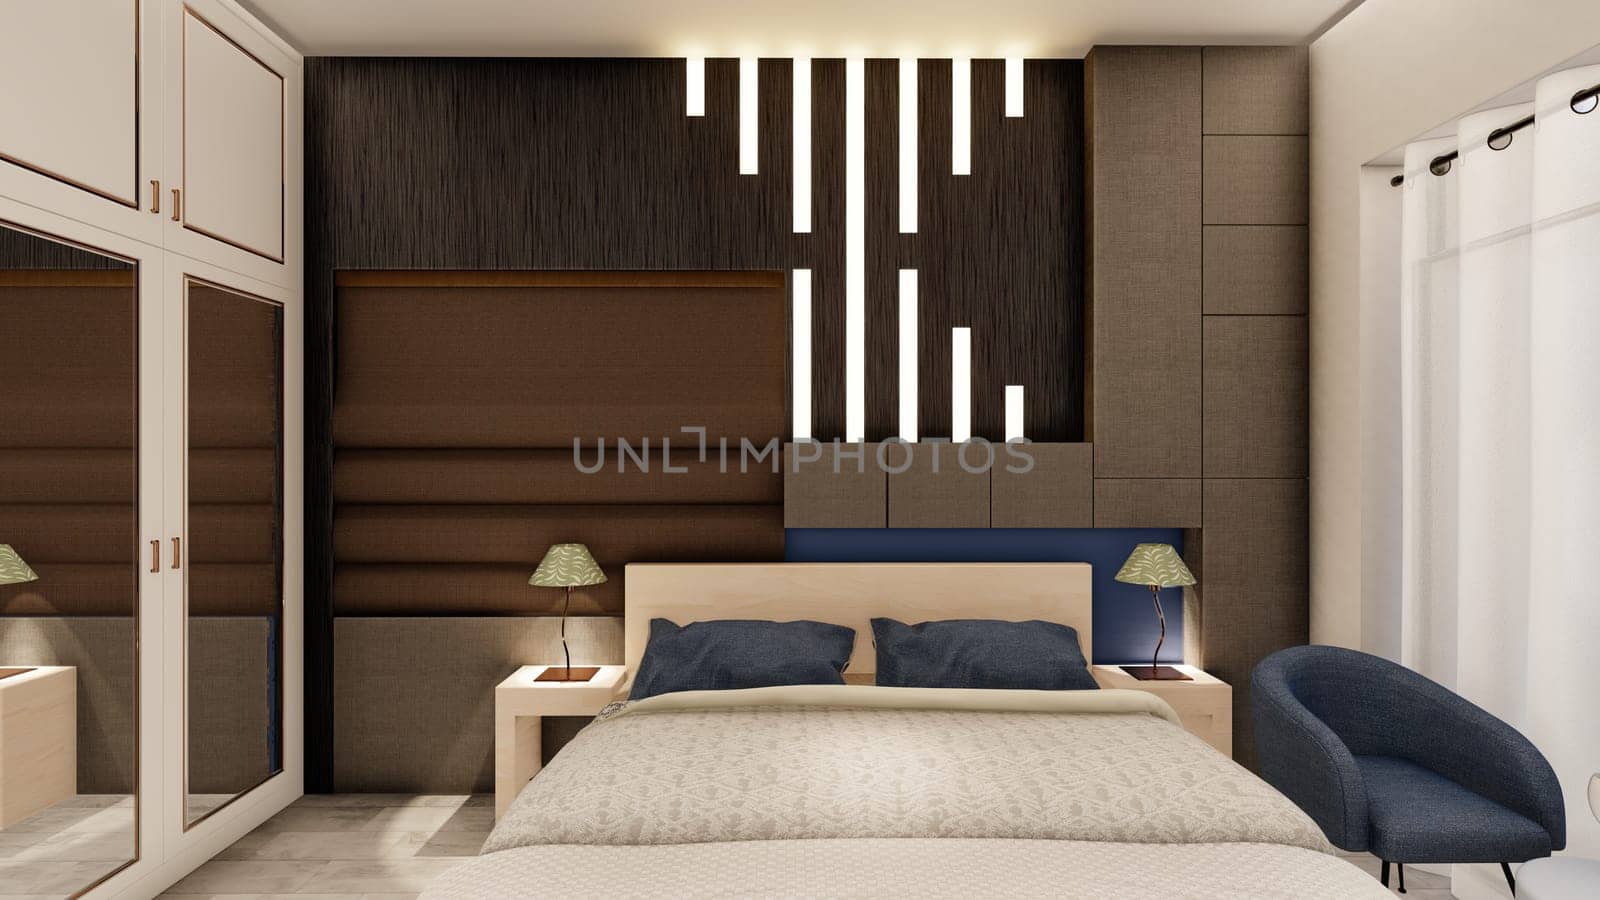 Realistic dark wooden bedroom interior with storage and backlight 3d rendering